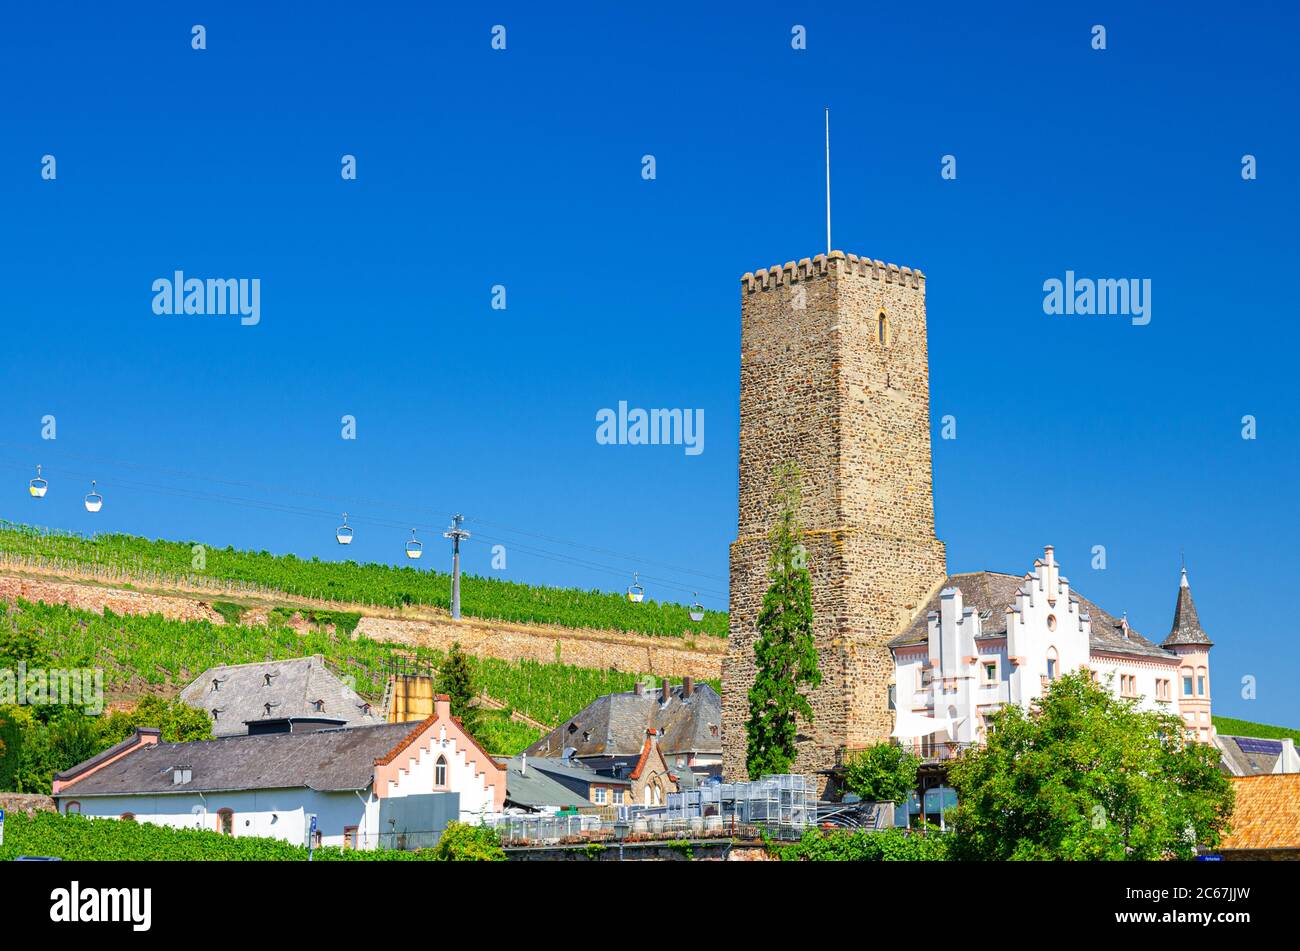 Stone tower building, cable car cableway above vineyards fields of river Rhine Valley hills in Rudesheim am Rhein historical town centre, blue sky background, State of Hesse, Germany Stock Photo